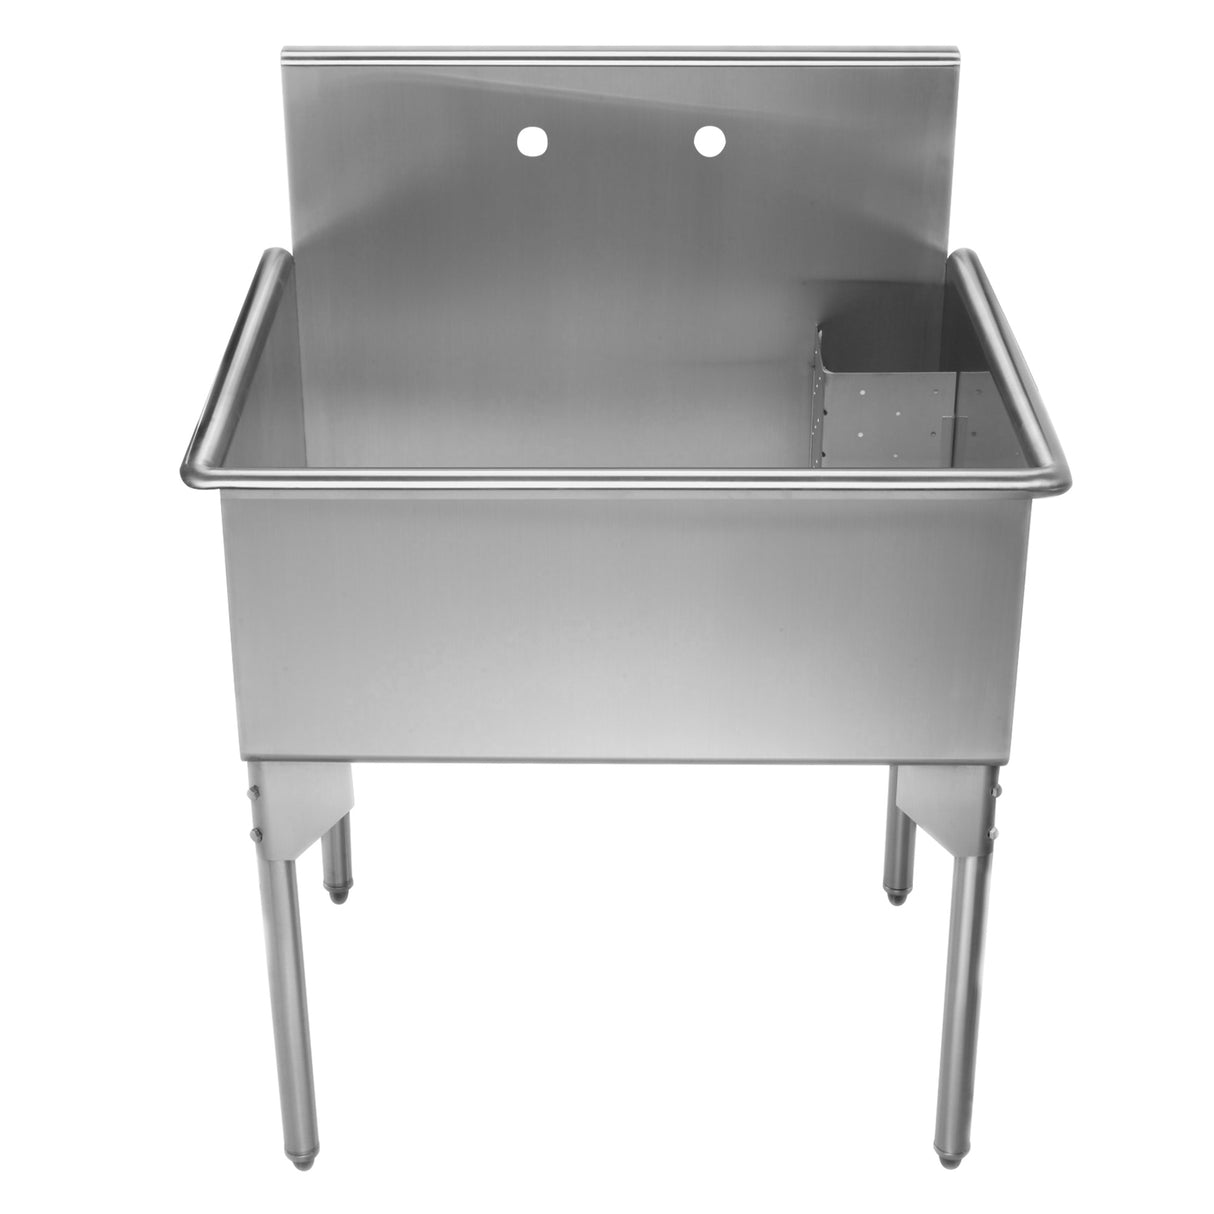 Pearlhaus Brushed Stainless Steel  Single Bowl Commerical Freestanding Utility Sink